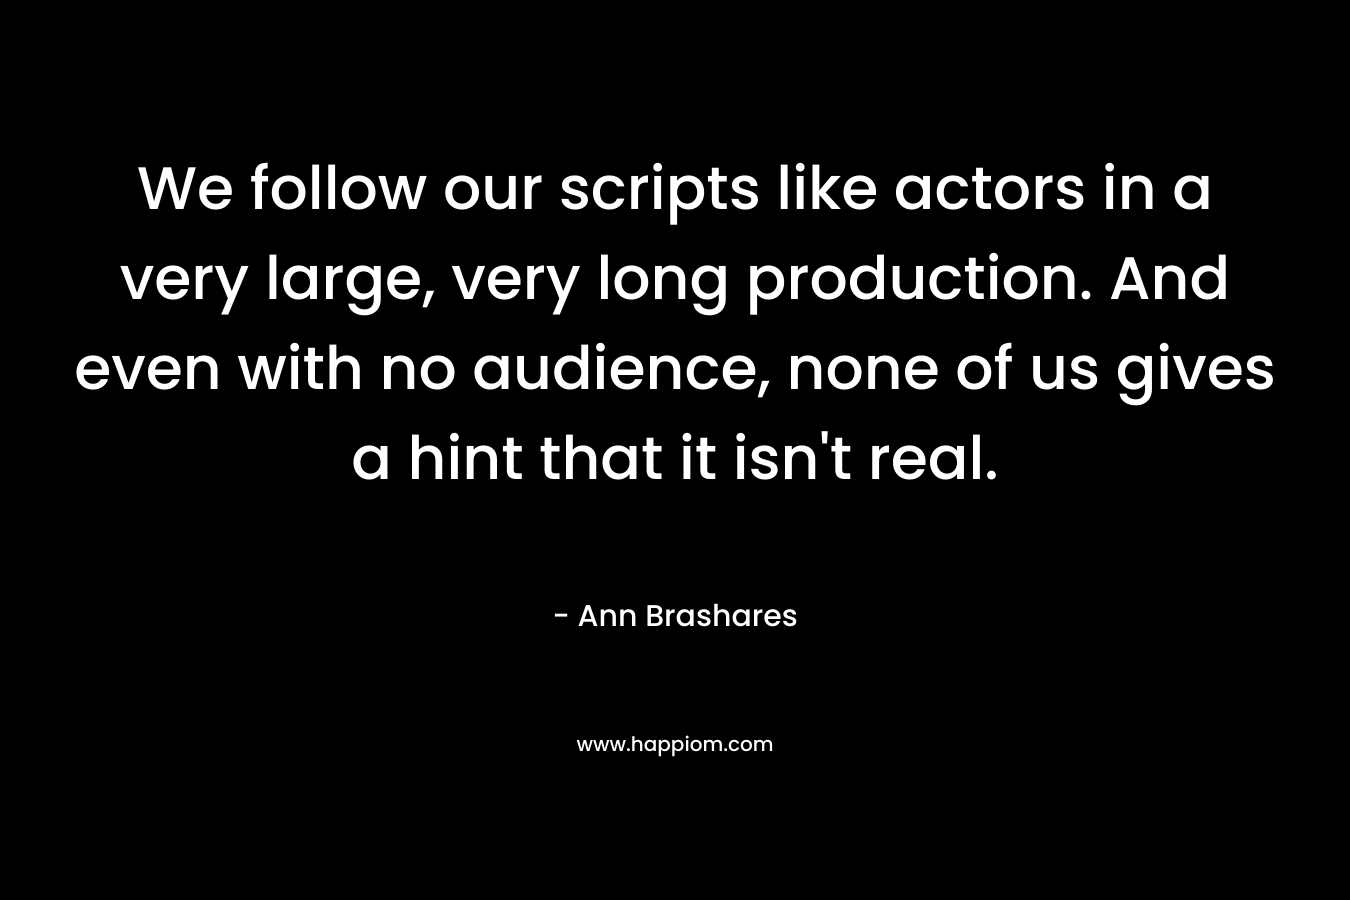 We follow our scripts like actors in a very large, very long production. And even with no audience, none of us gives a hint that it isn't real.